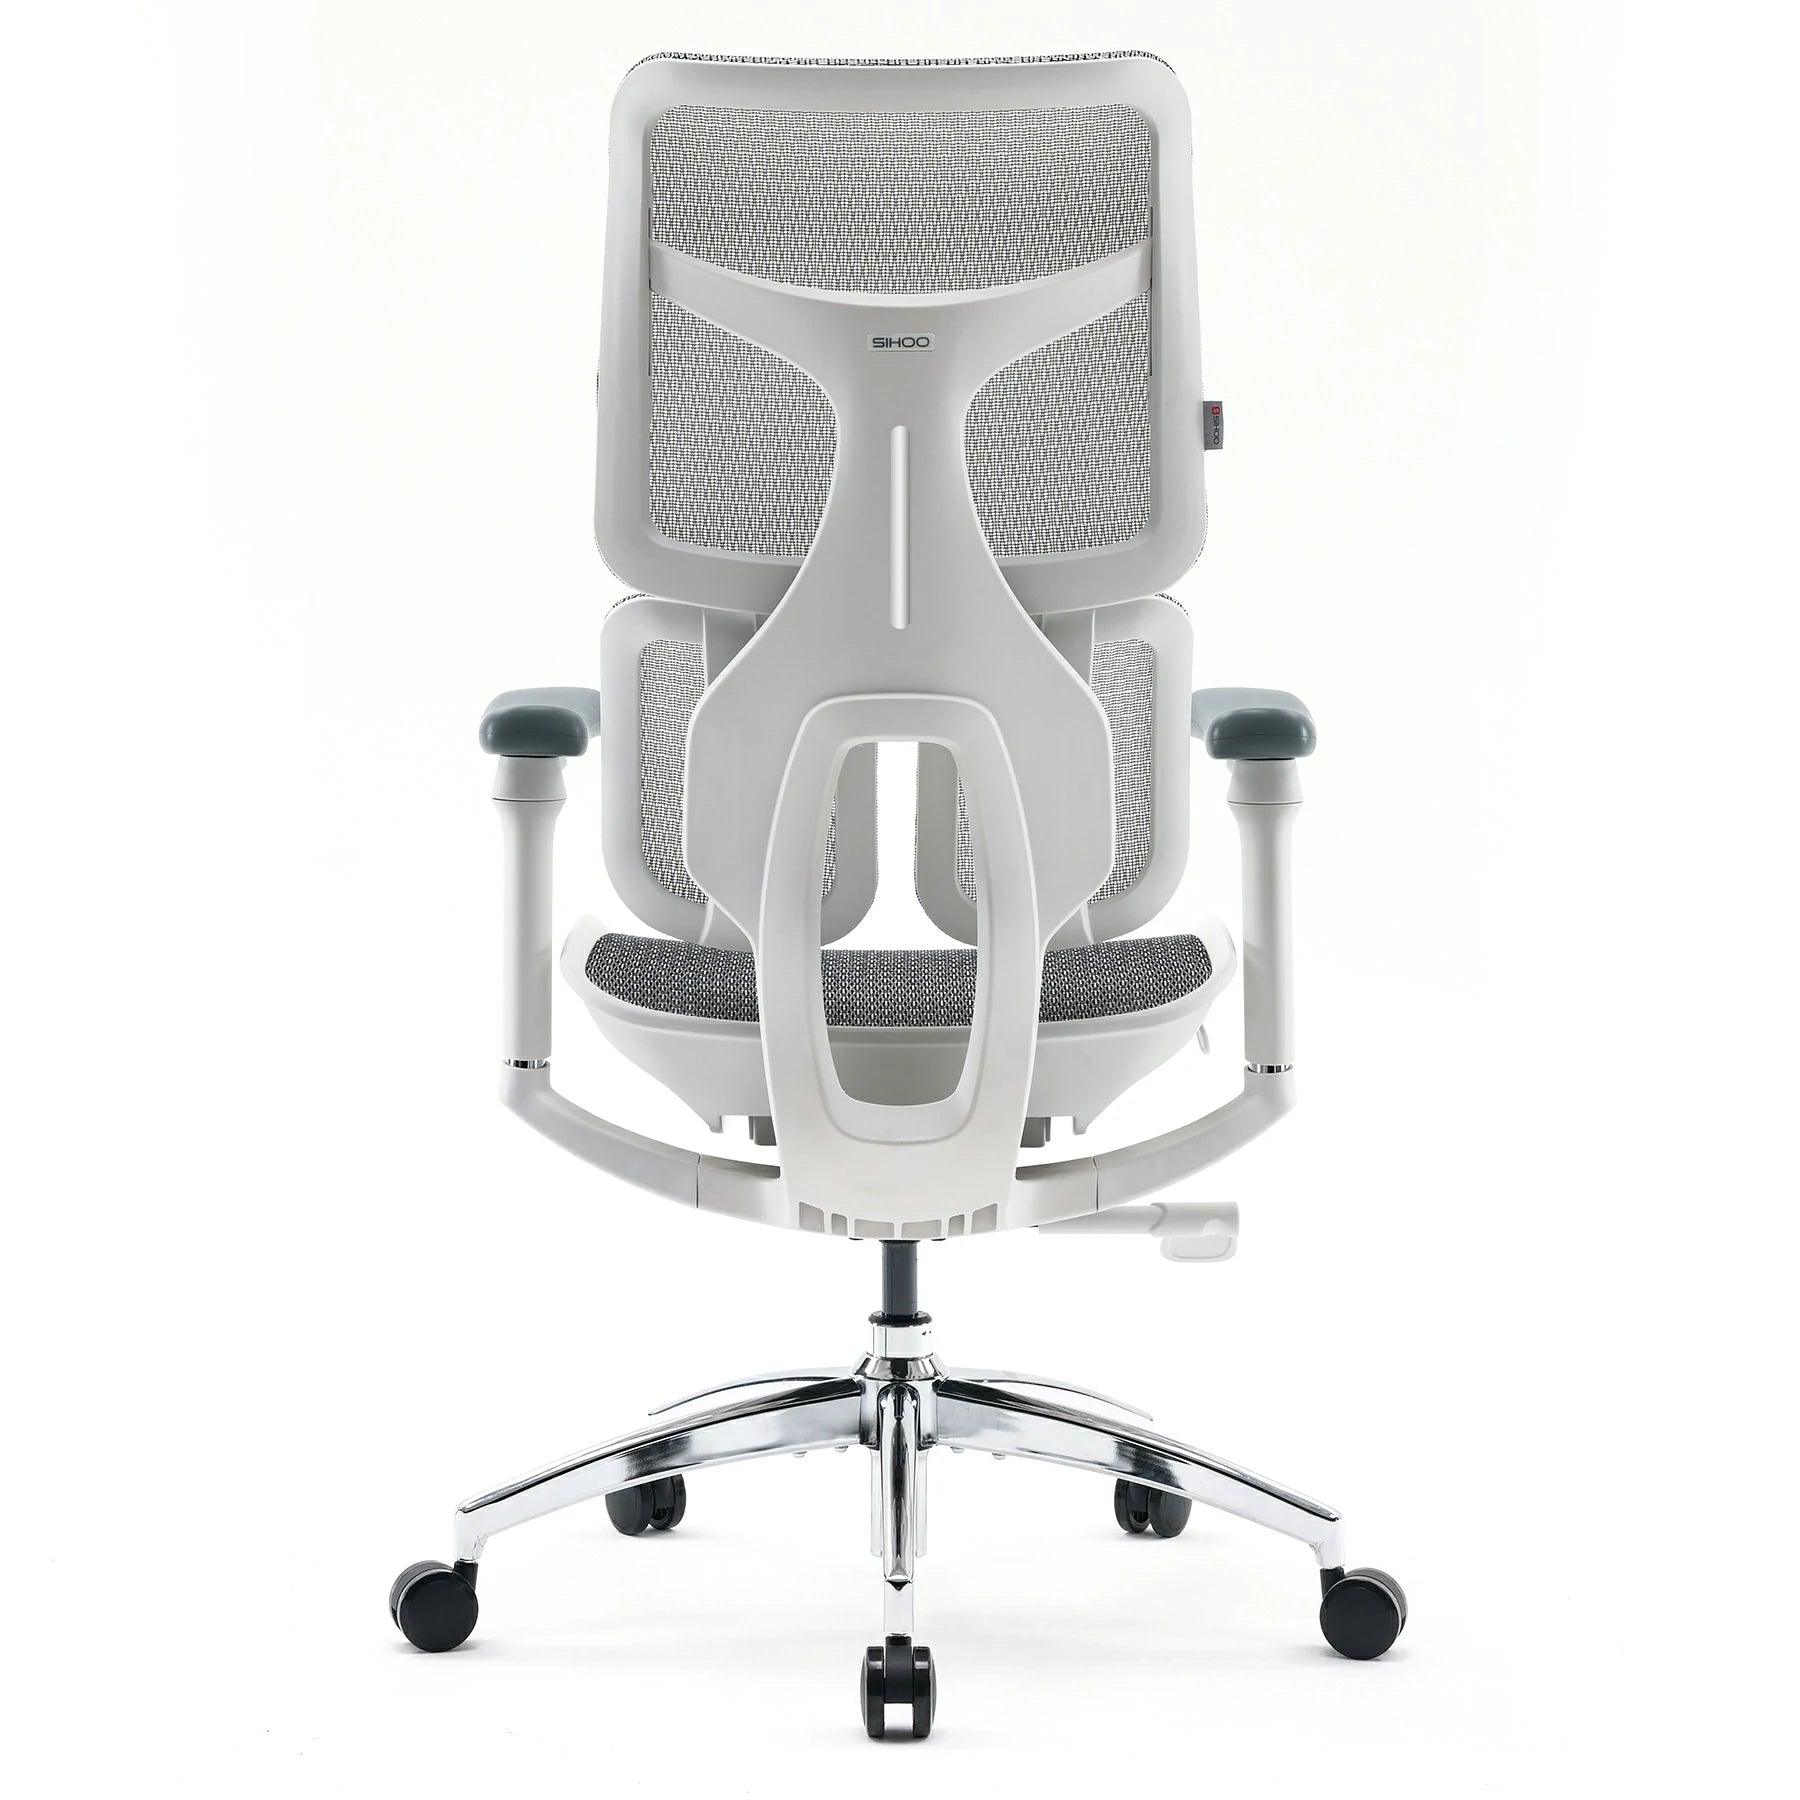 (NEW) Sihoo Doro S100 Ergonomic Office Chair with Dual Dynamic Lumbar  Support